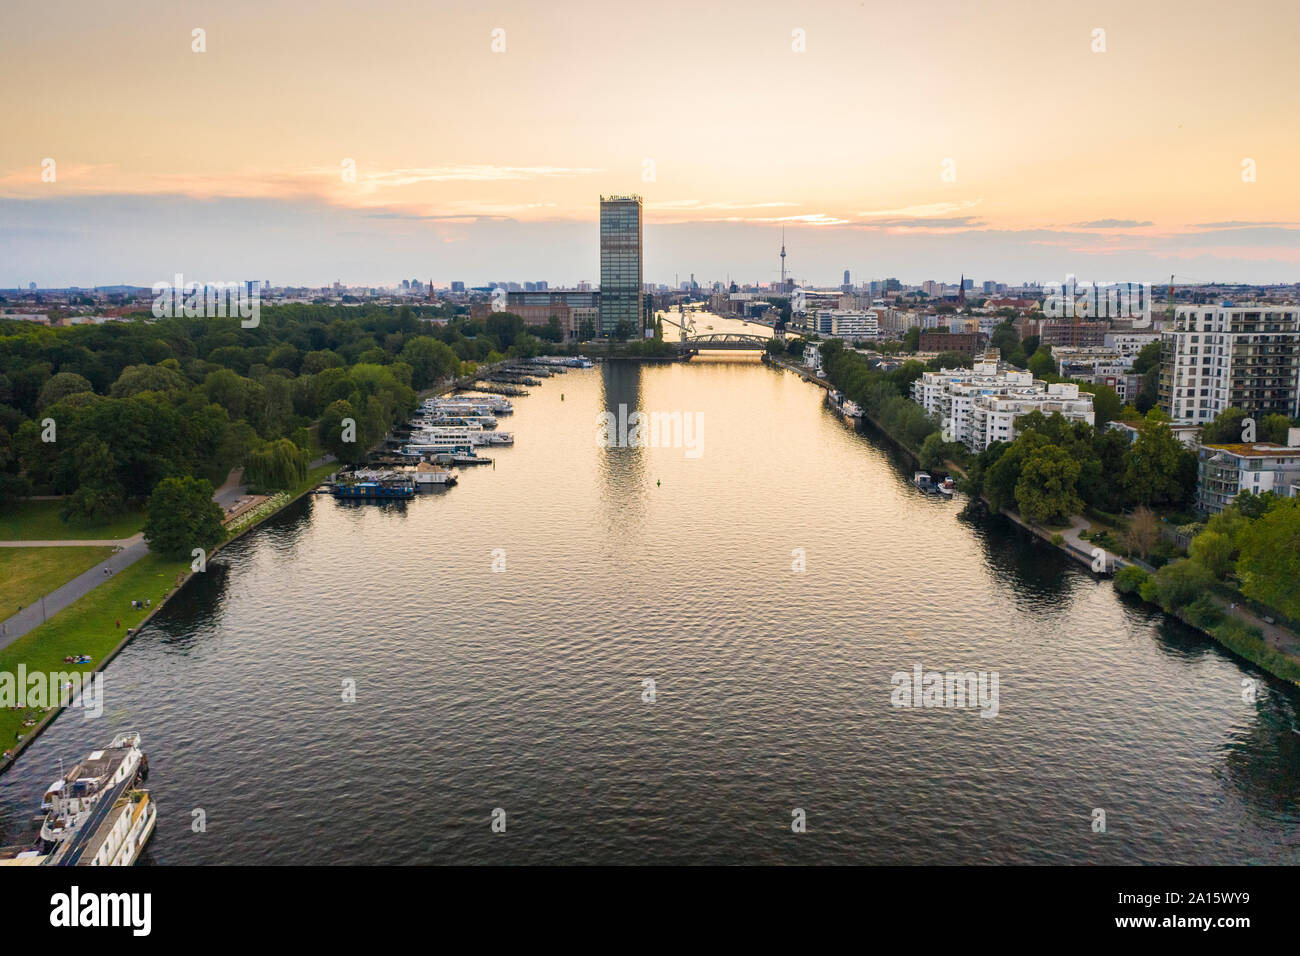 Spree river flowing amidst residential building seen from Treptower Park against sky during sunset Stock Photo